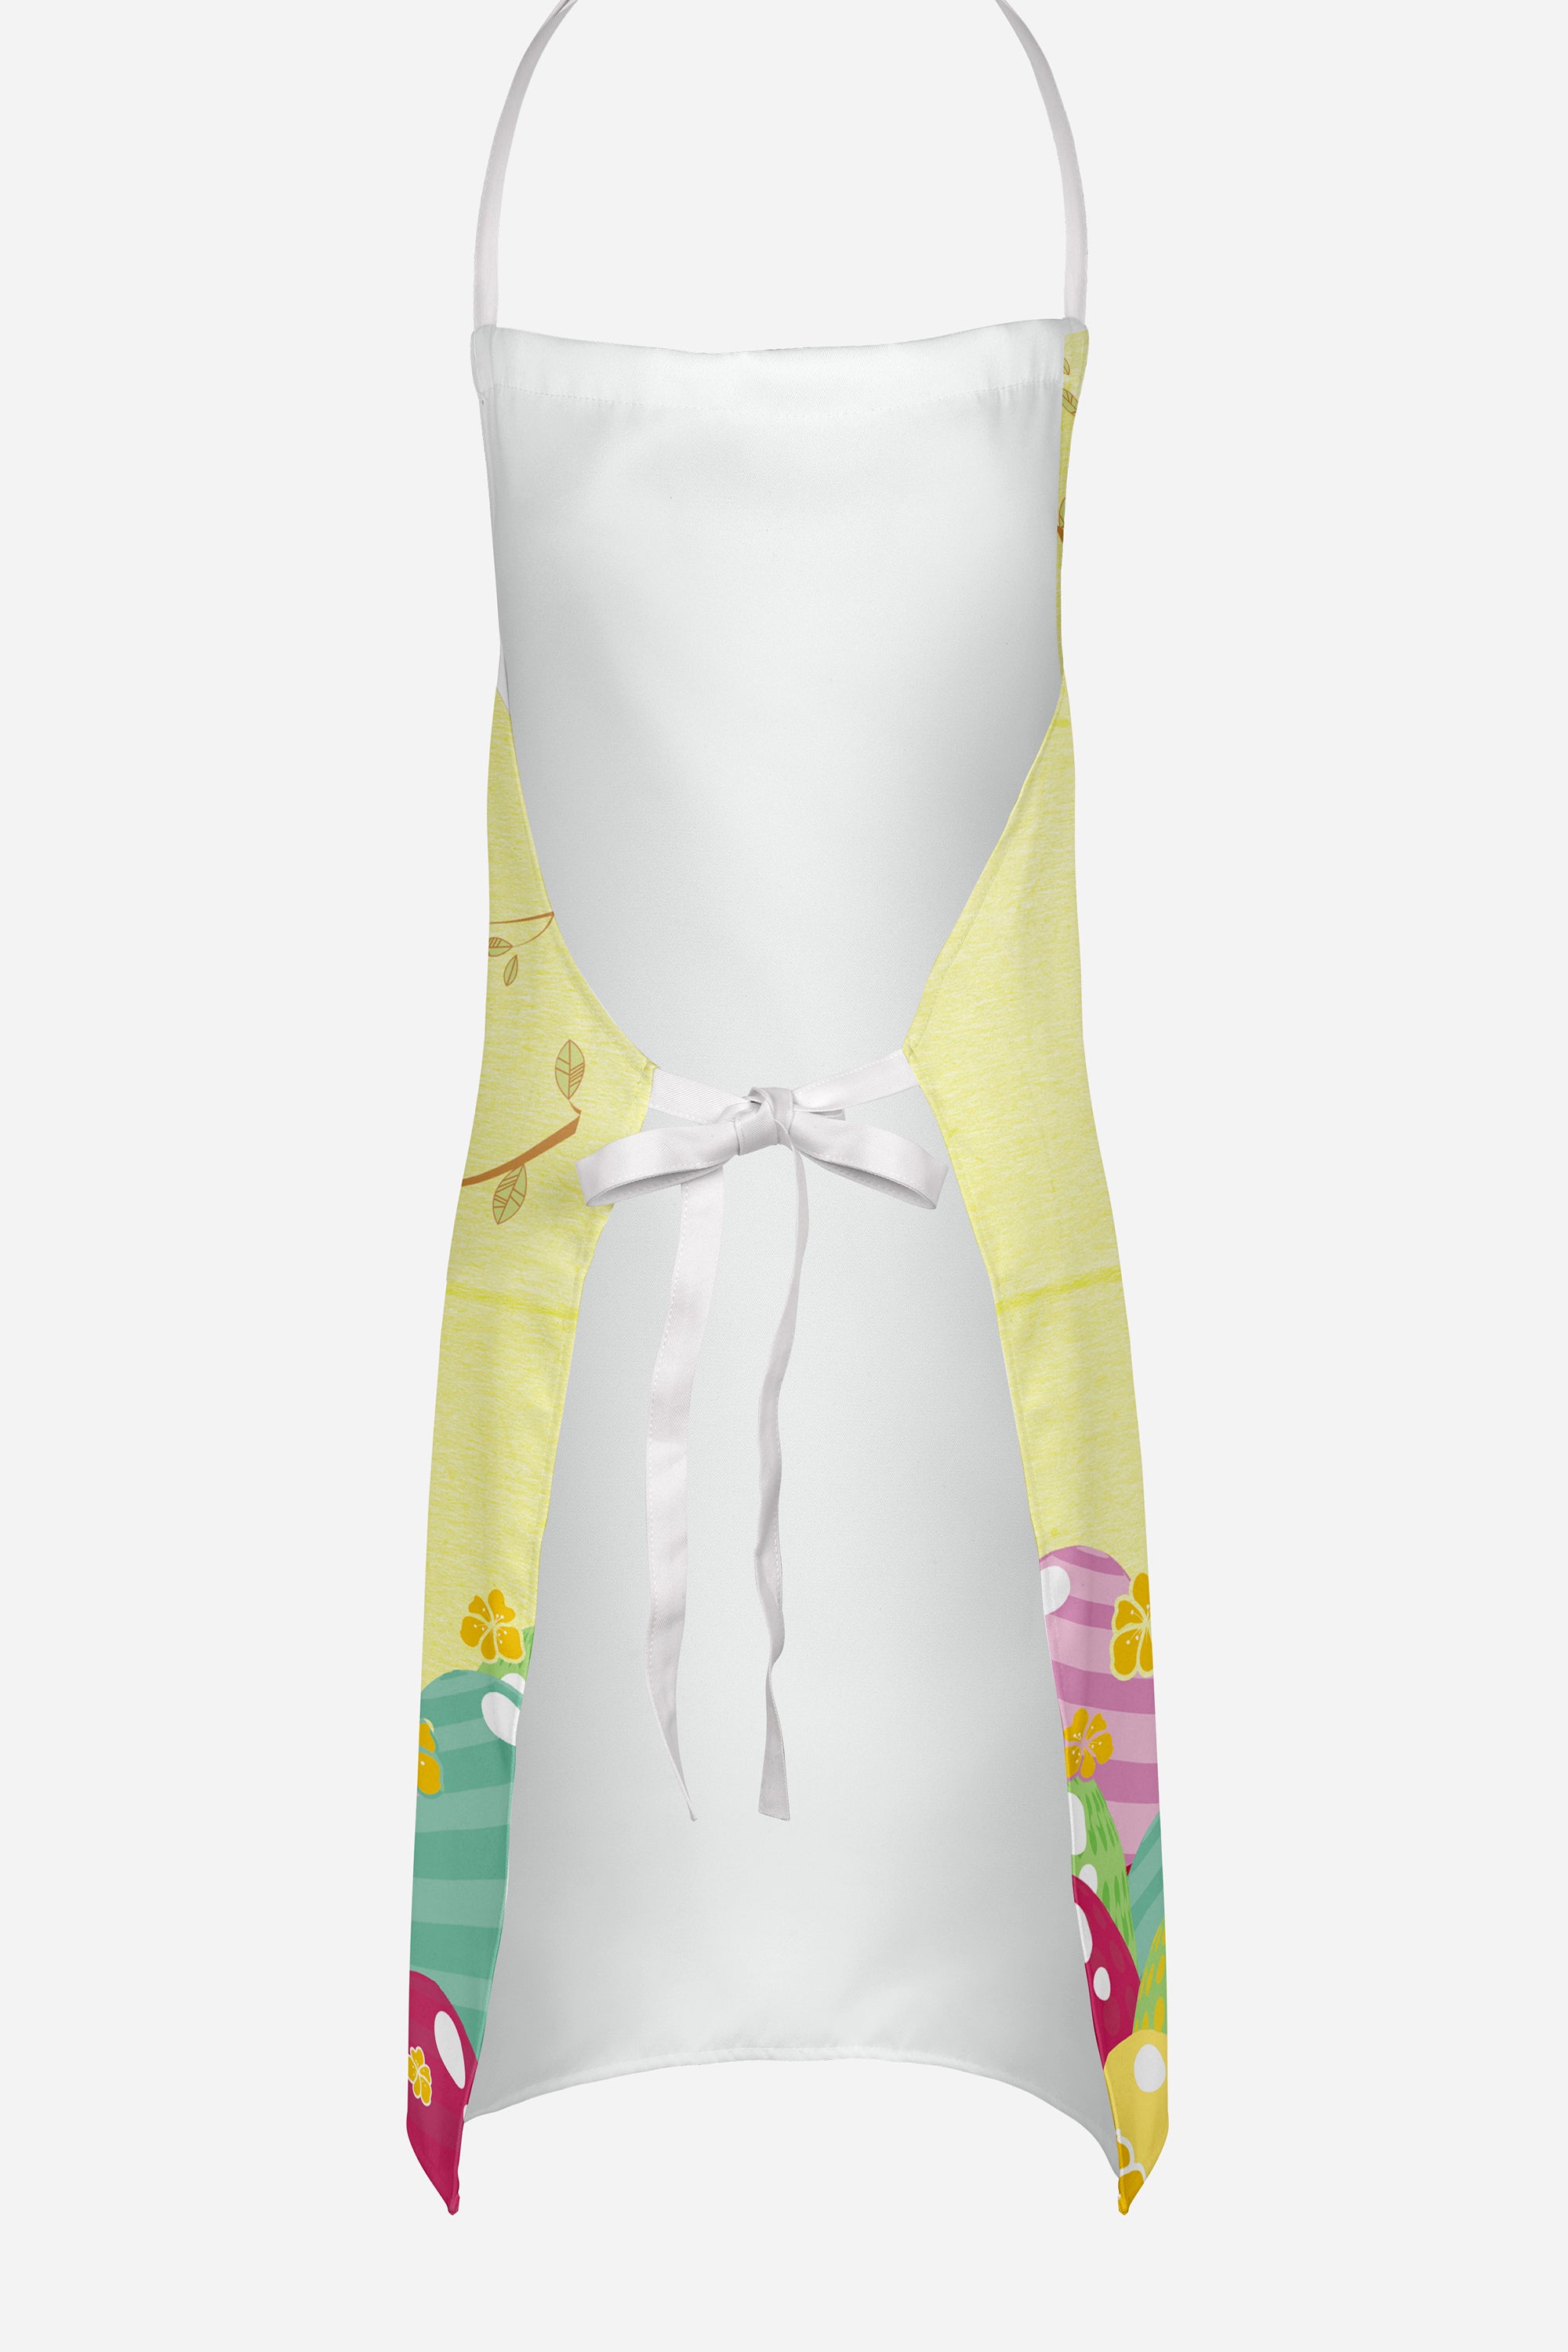 Easter Eggs Moscow Watchdog Apron BB6027APRON